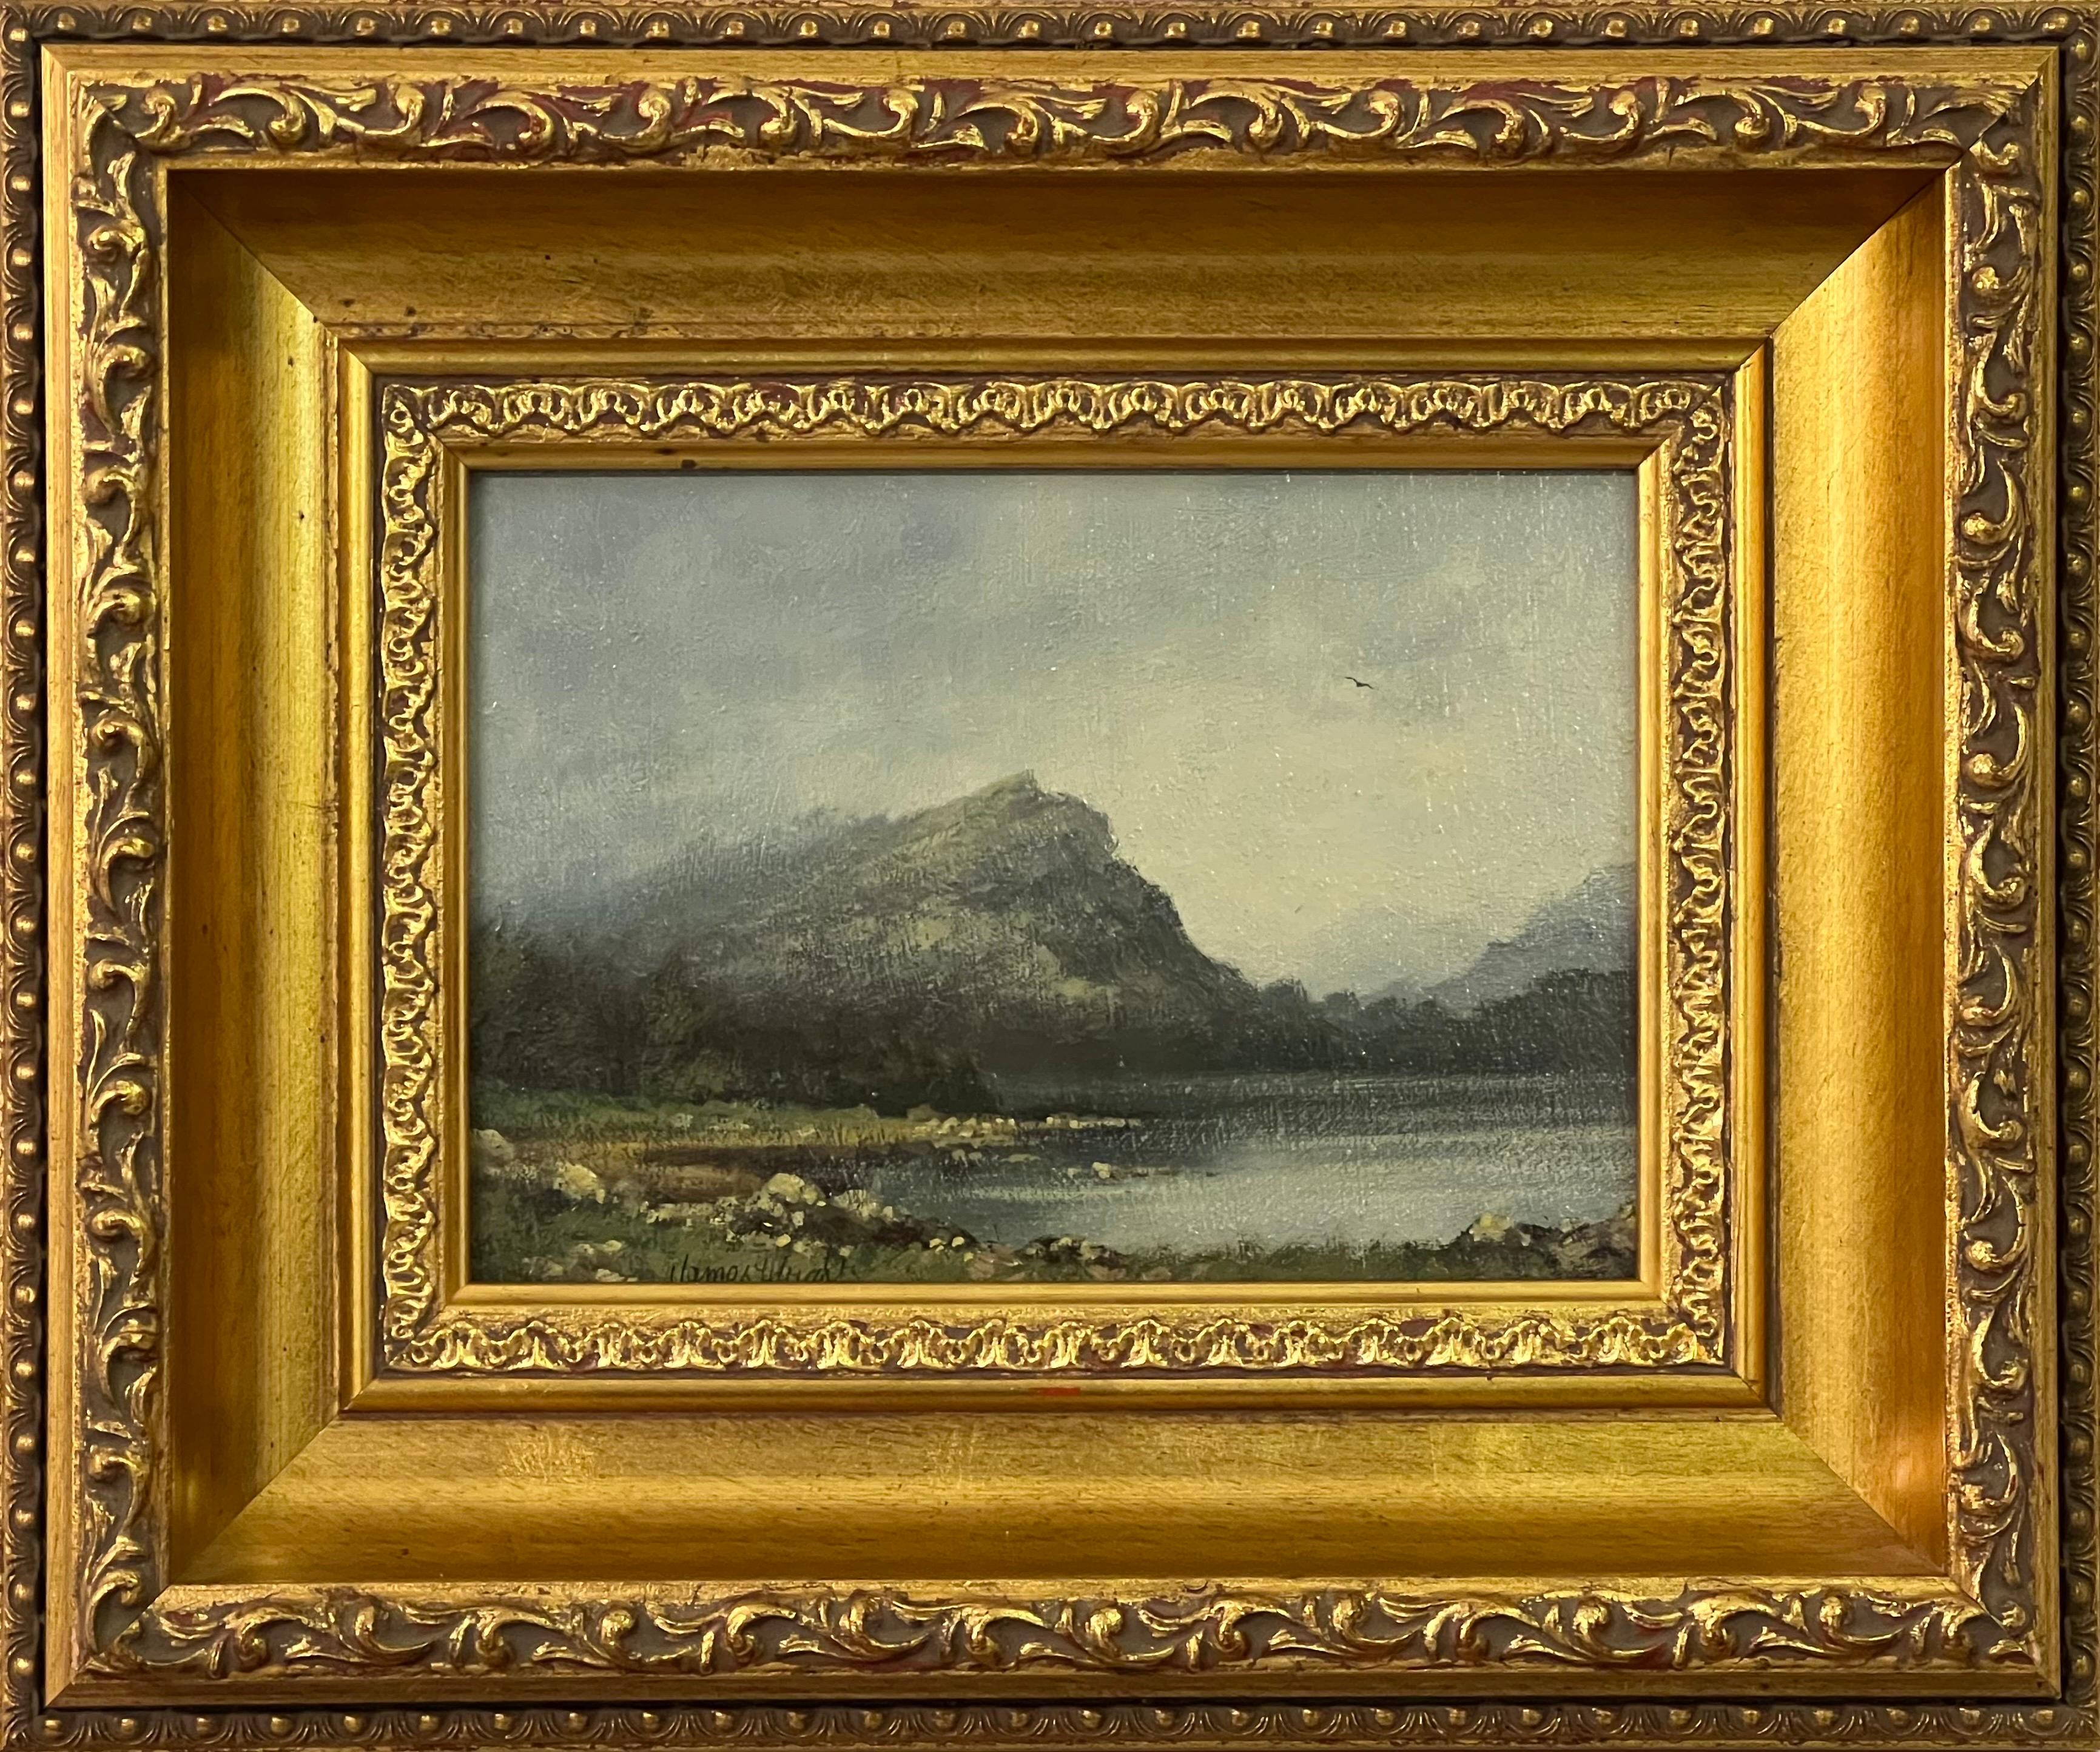 James Wright Animal Painting - Painting of Lake & Mountains in England by 20th Century British Landscape Artist